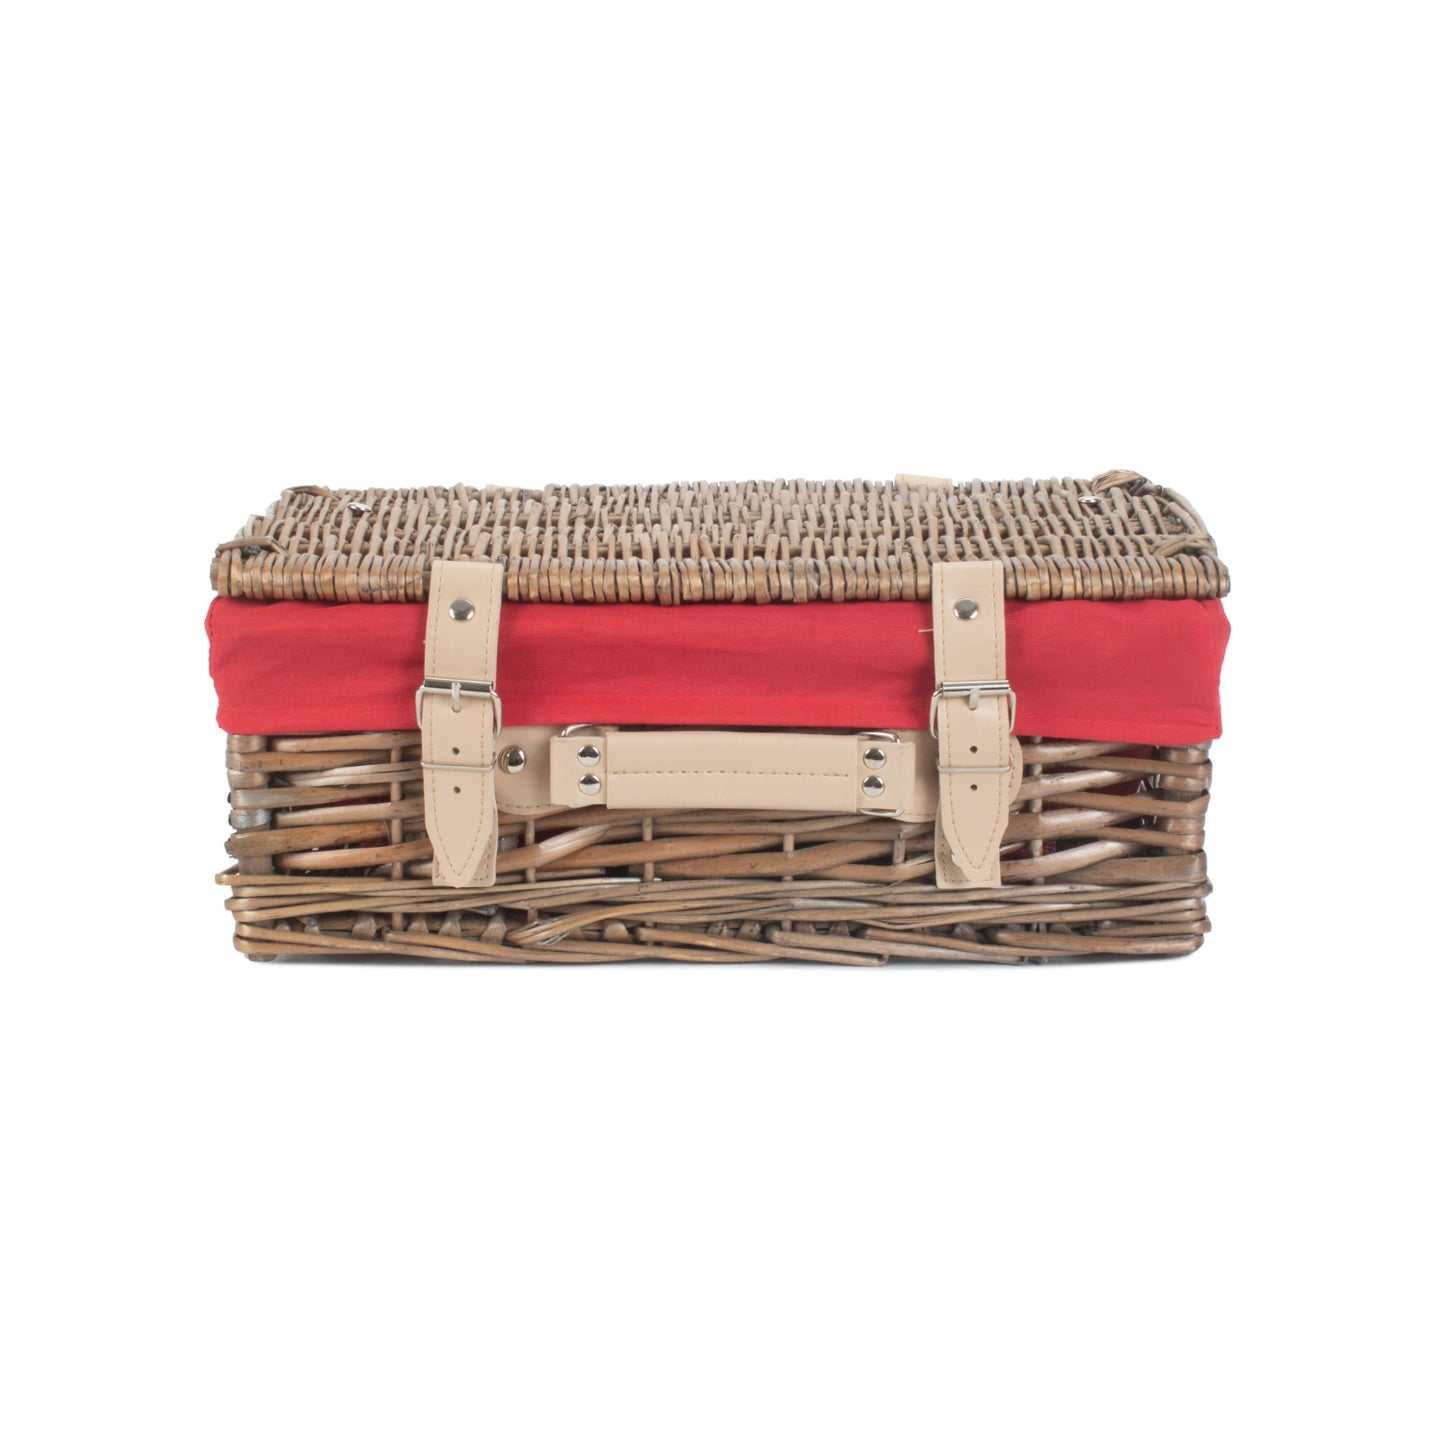 14 Inch Antique Wash Split Willow Hamper With Red Lining